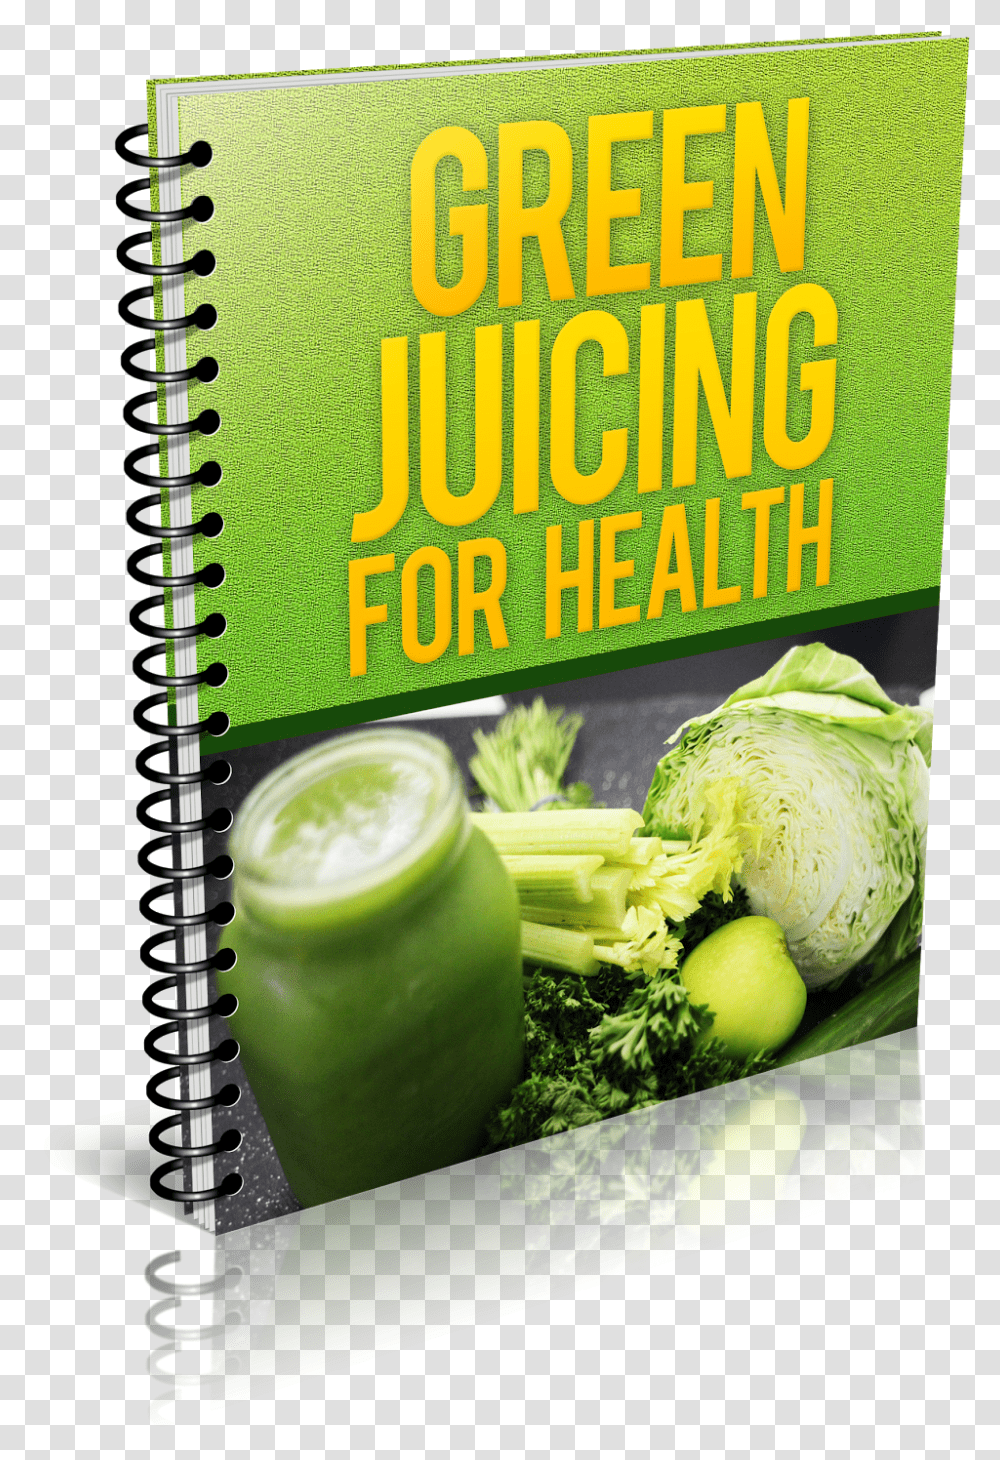 Green Juicing For Health And Wellness Download Weight Loss, Plant, Vegetable, Food, Produce Transparent Png